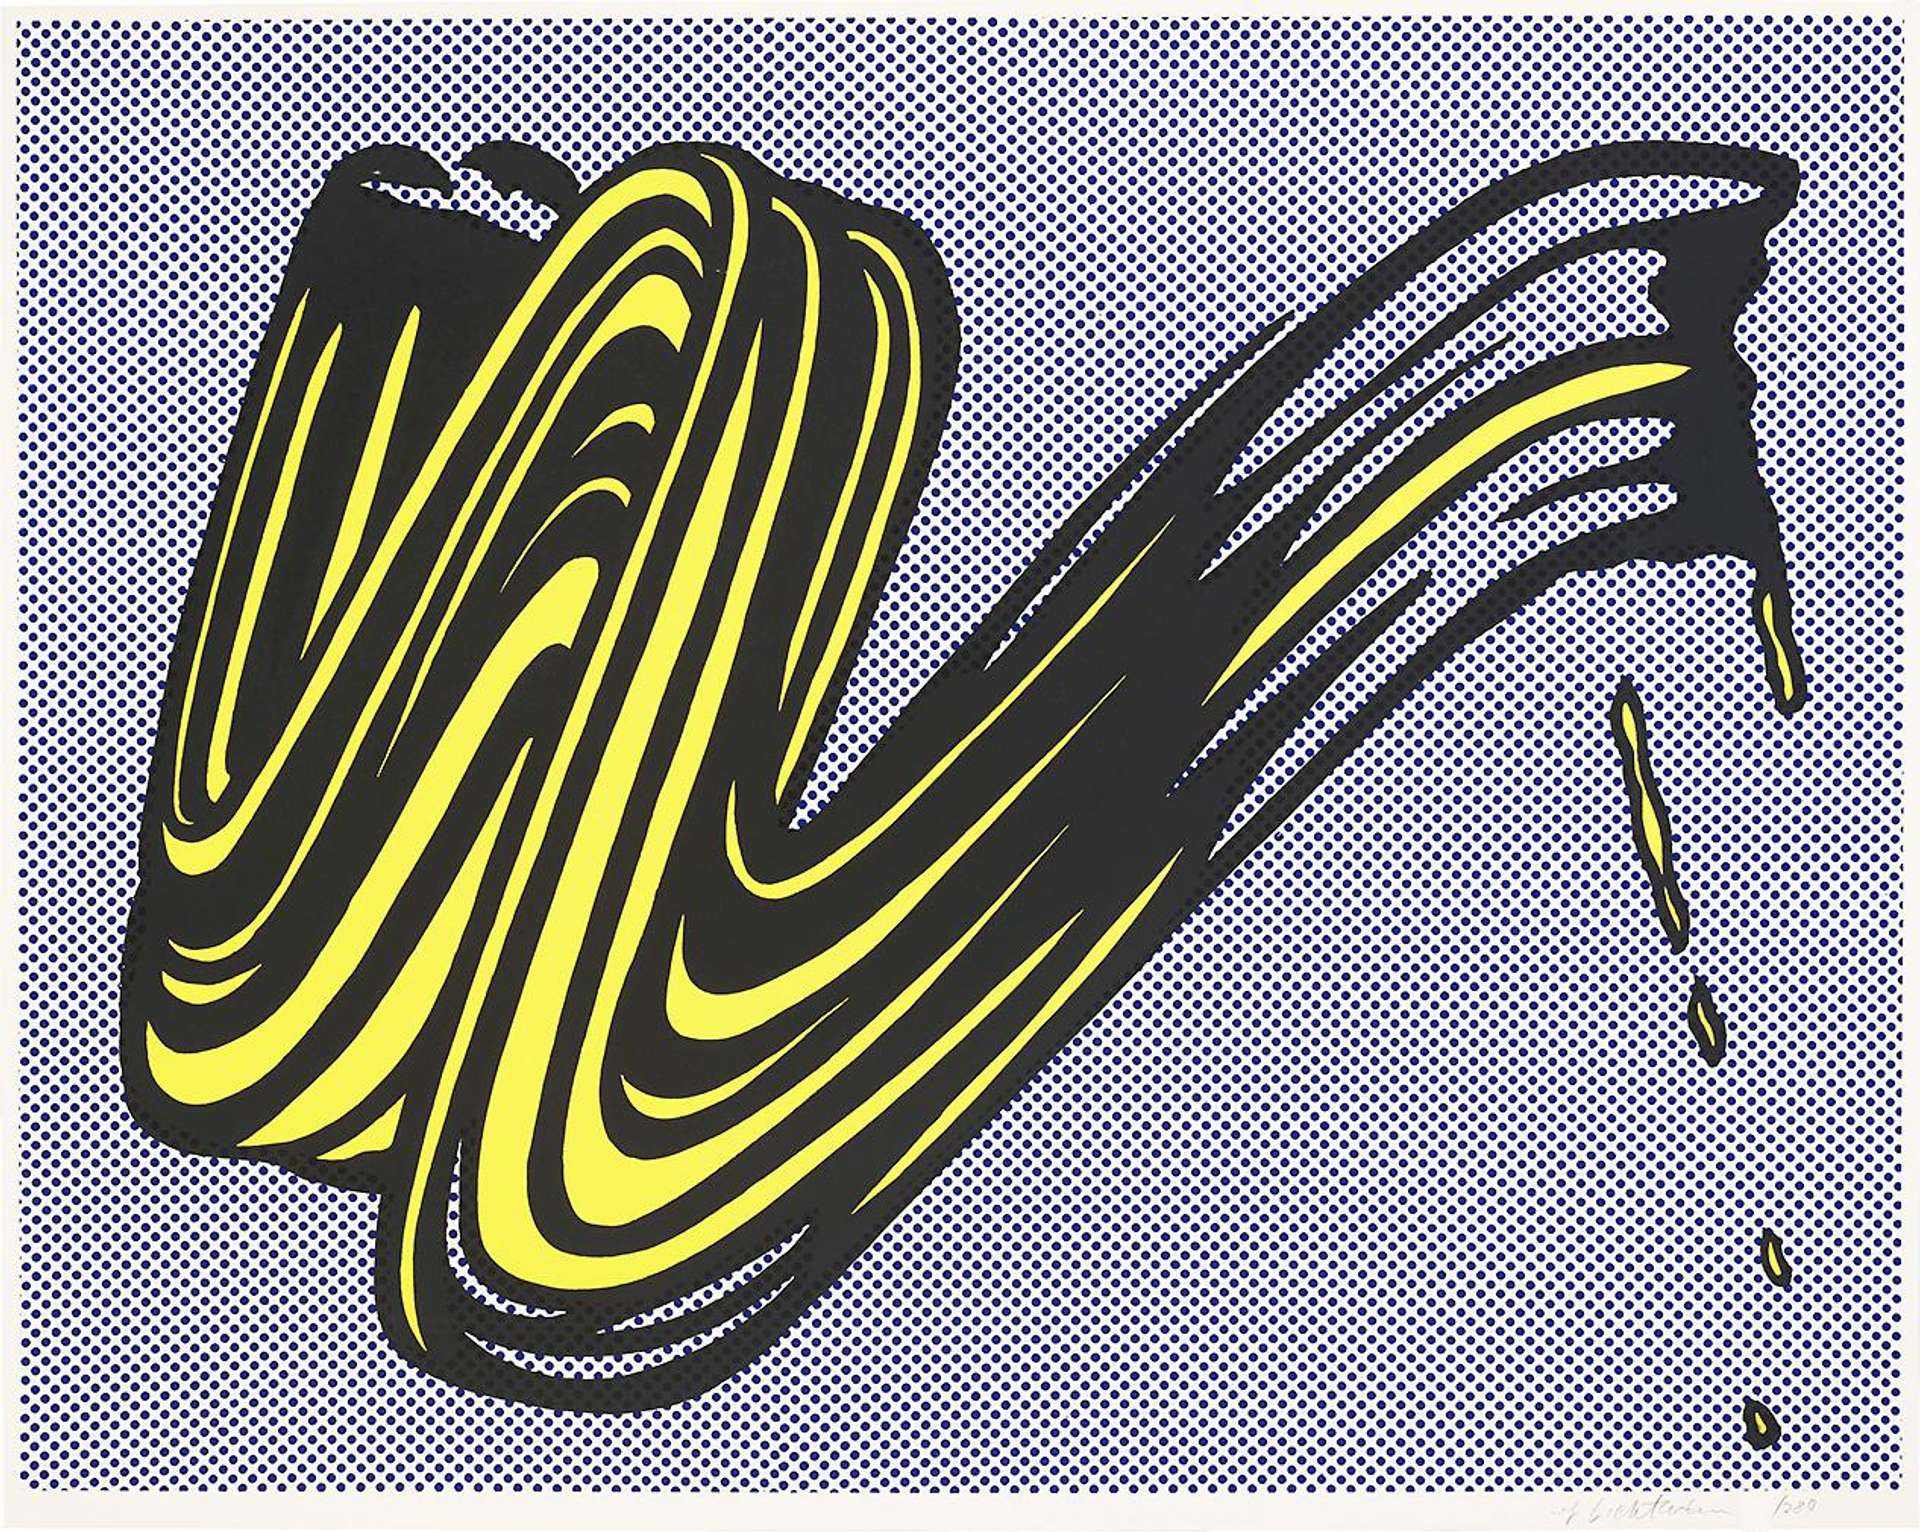 Lichtenstein centers his enlarged bright yellow brushstroke on a background composed of blue and white Ben Day dots. The flattened sporadic drips and splatters, and the trailing outlines defining the brushstroke add tone and dimension to the composition. 